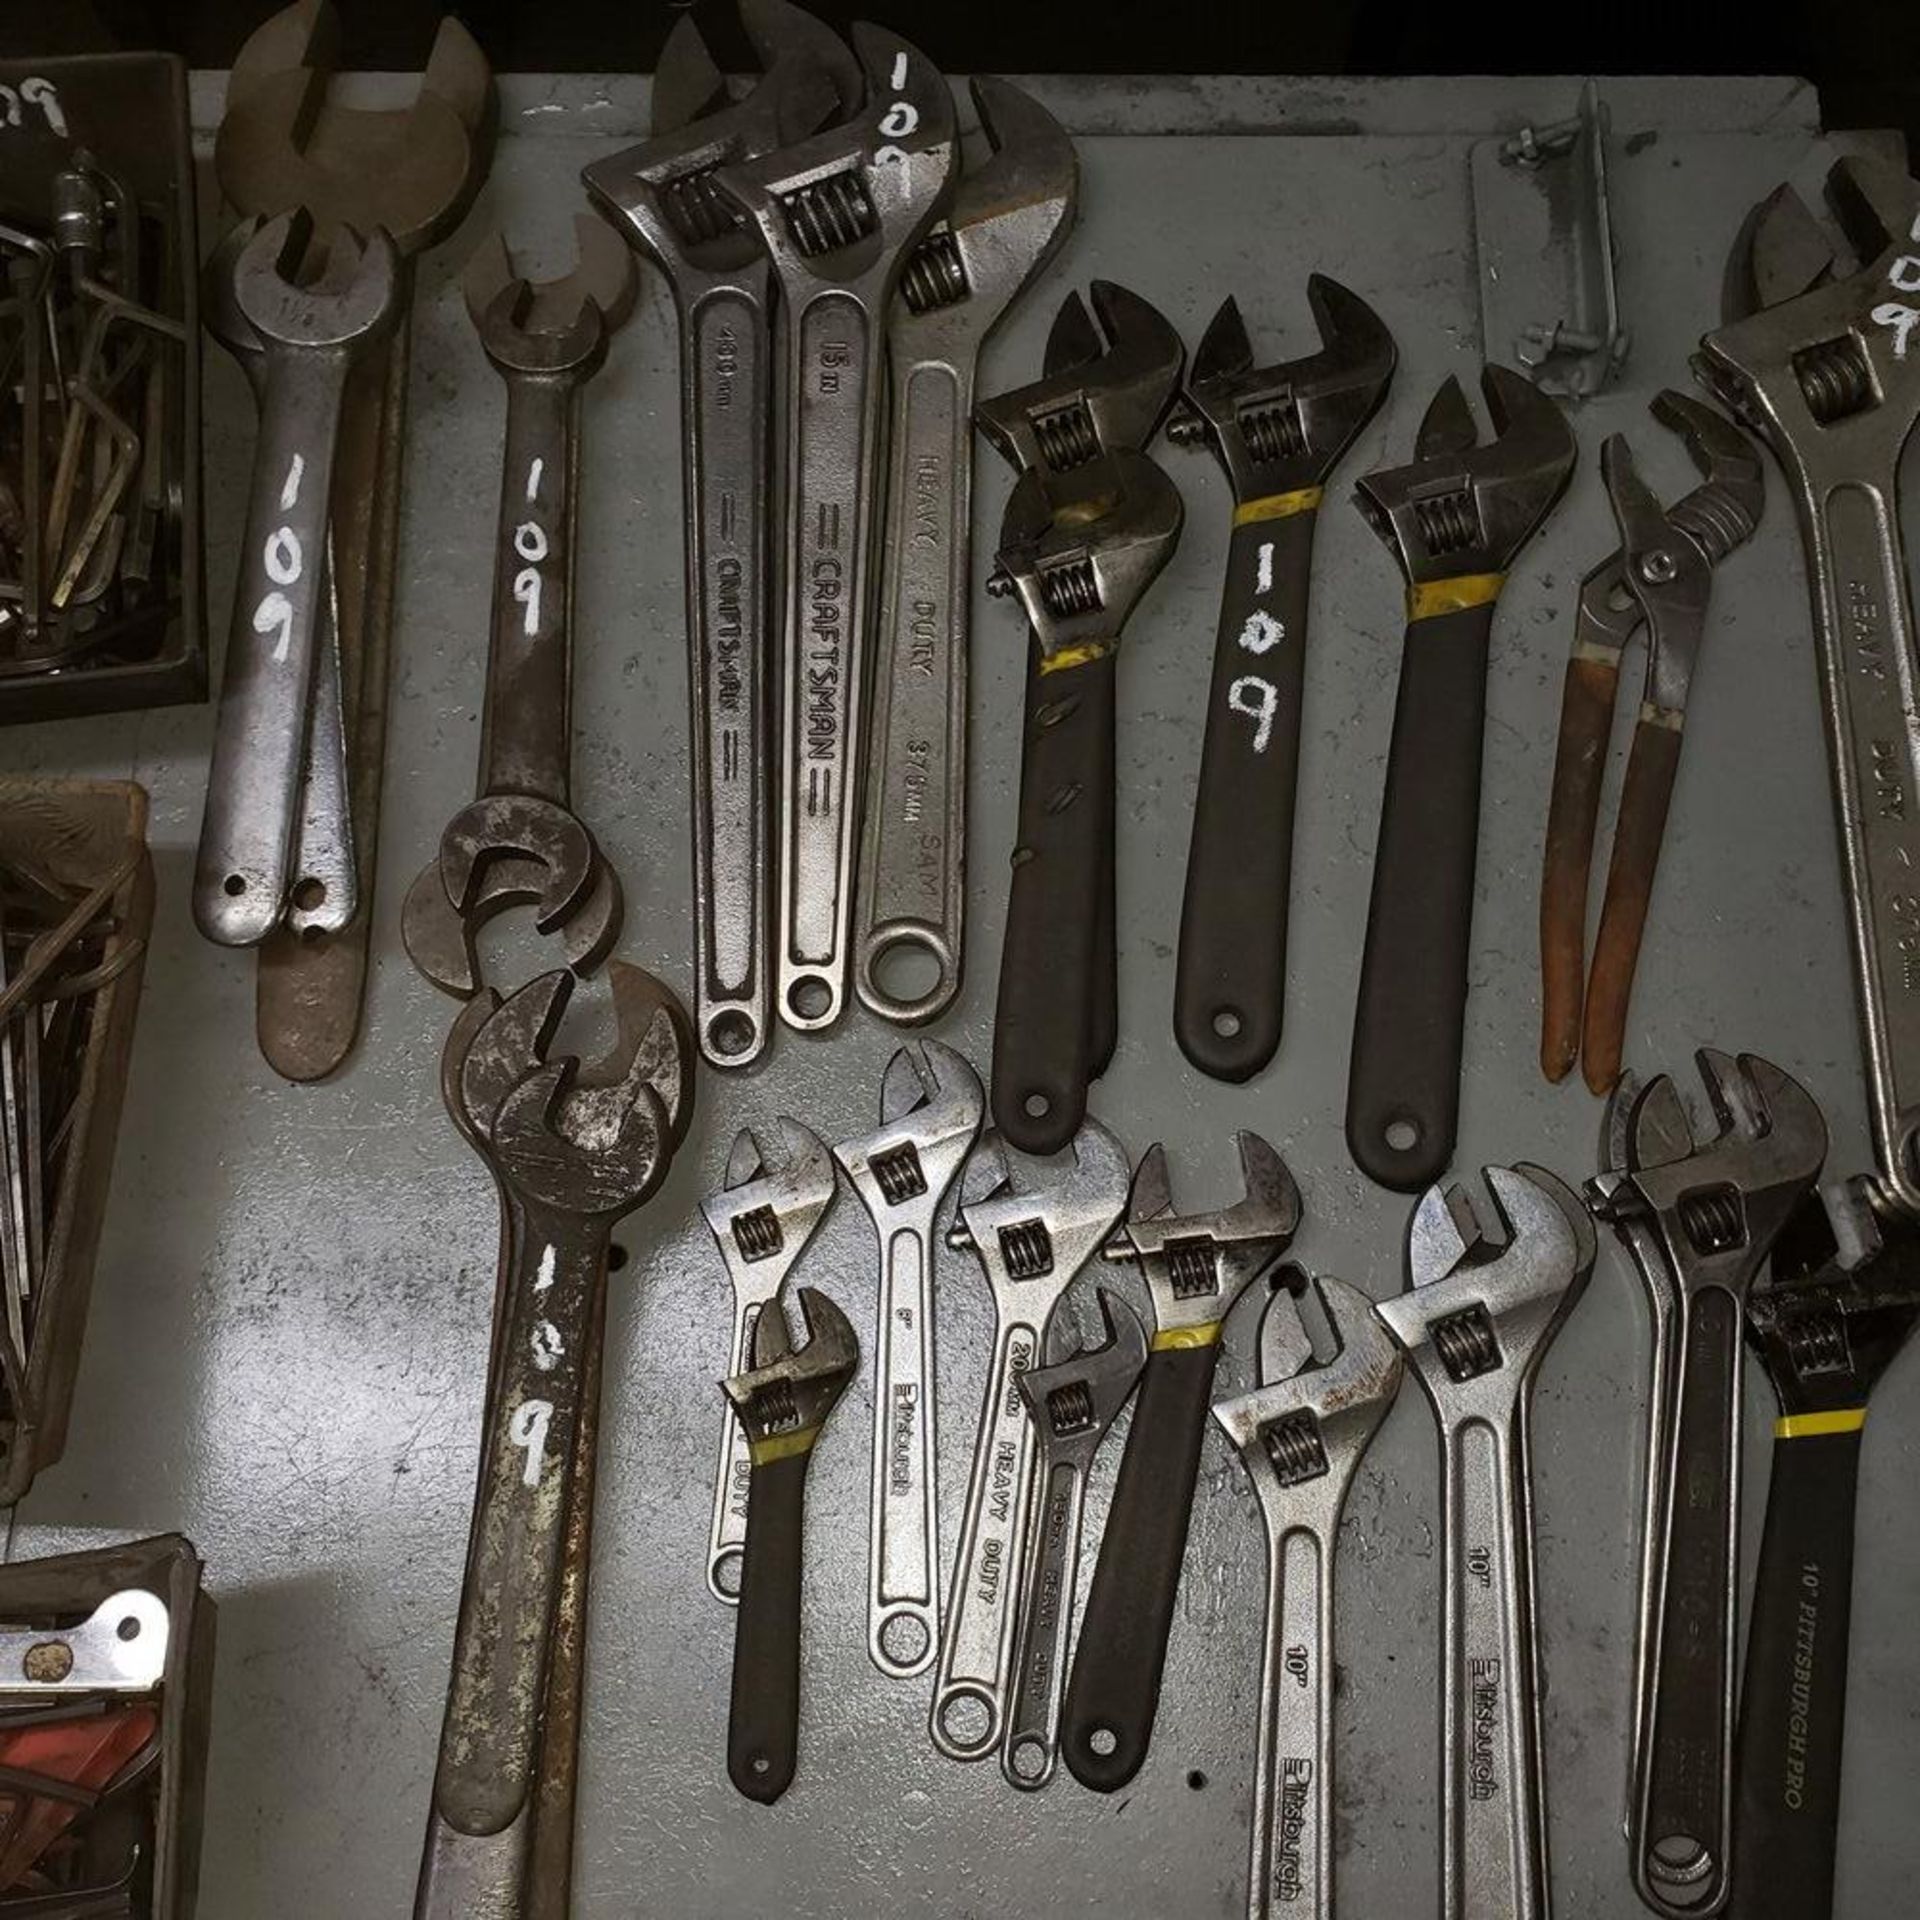 Group of Large Craftsman Wrenches - Image 2 of 3